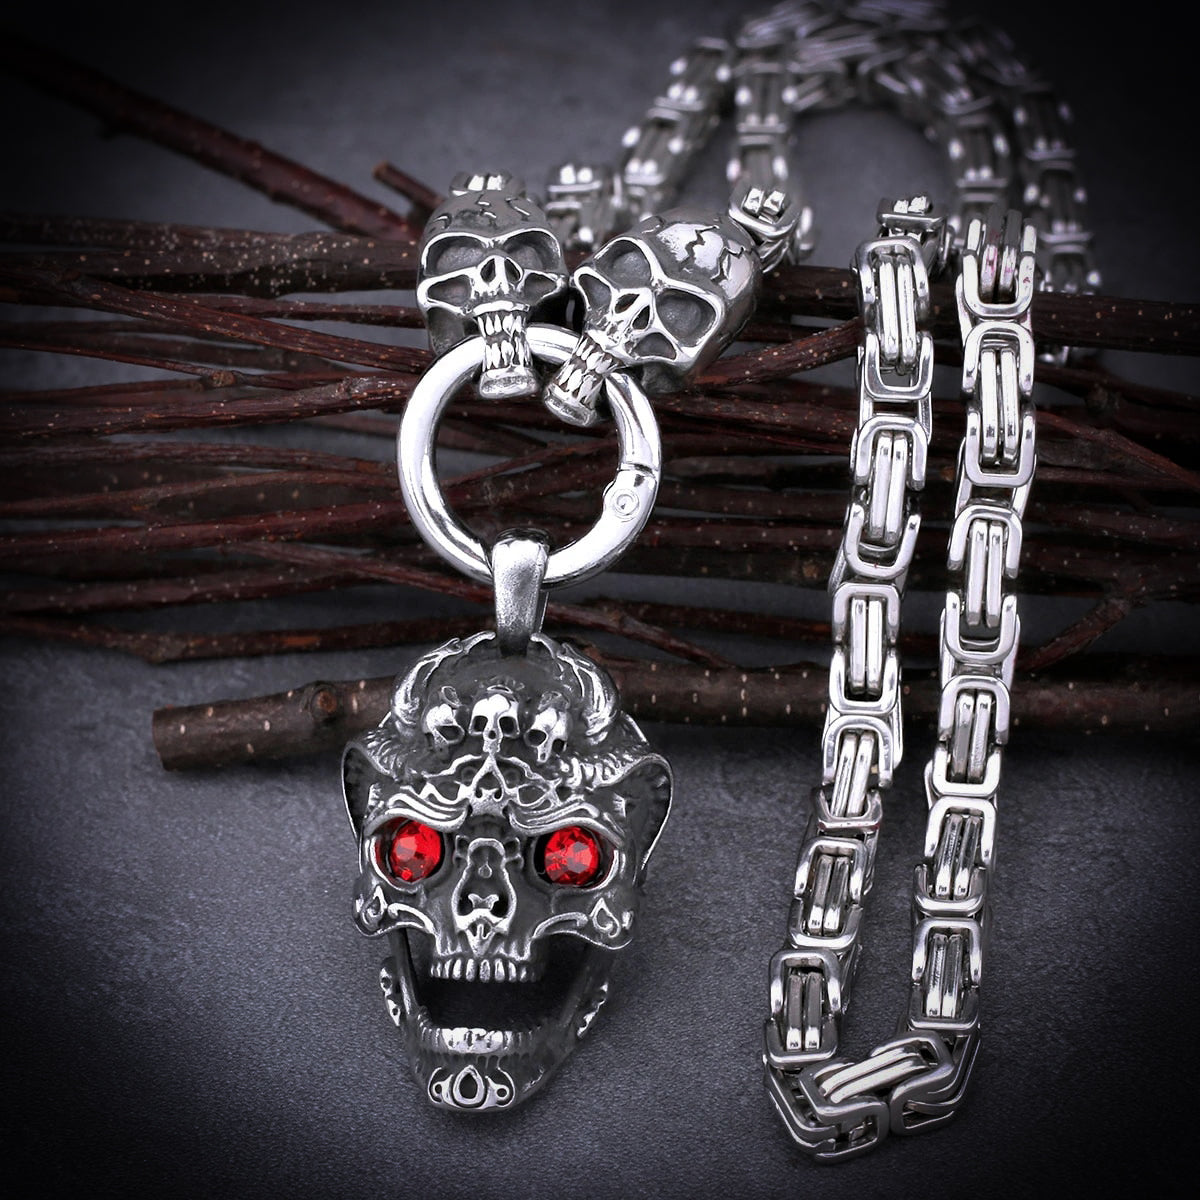 Red Eye Skull Pendant and Square Chain Necklace with square chain